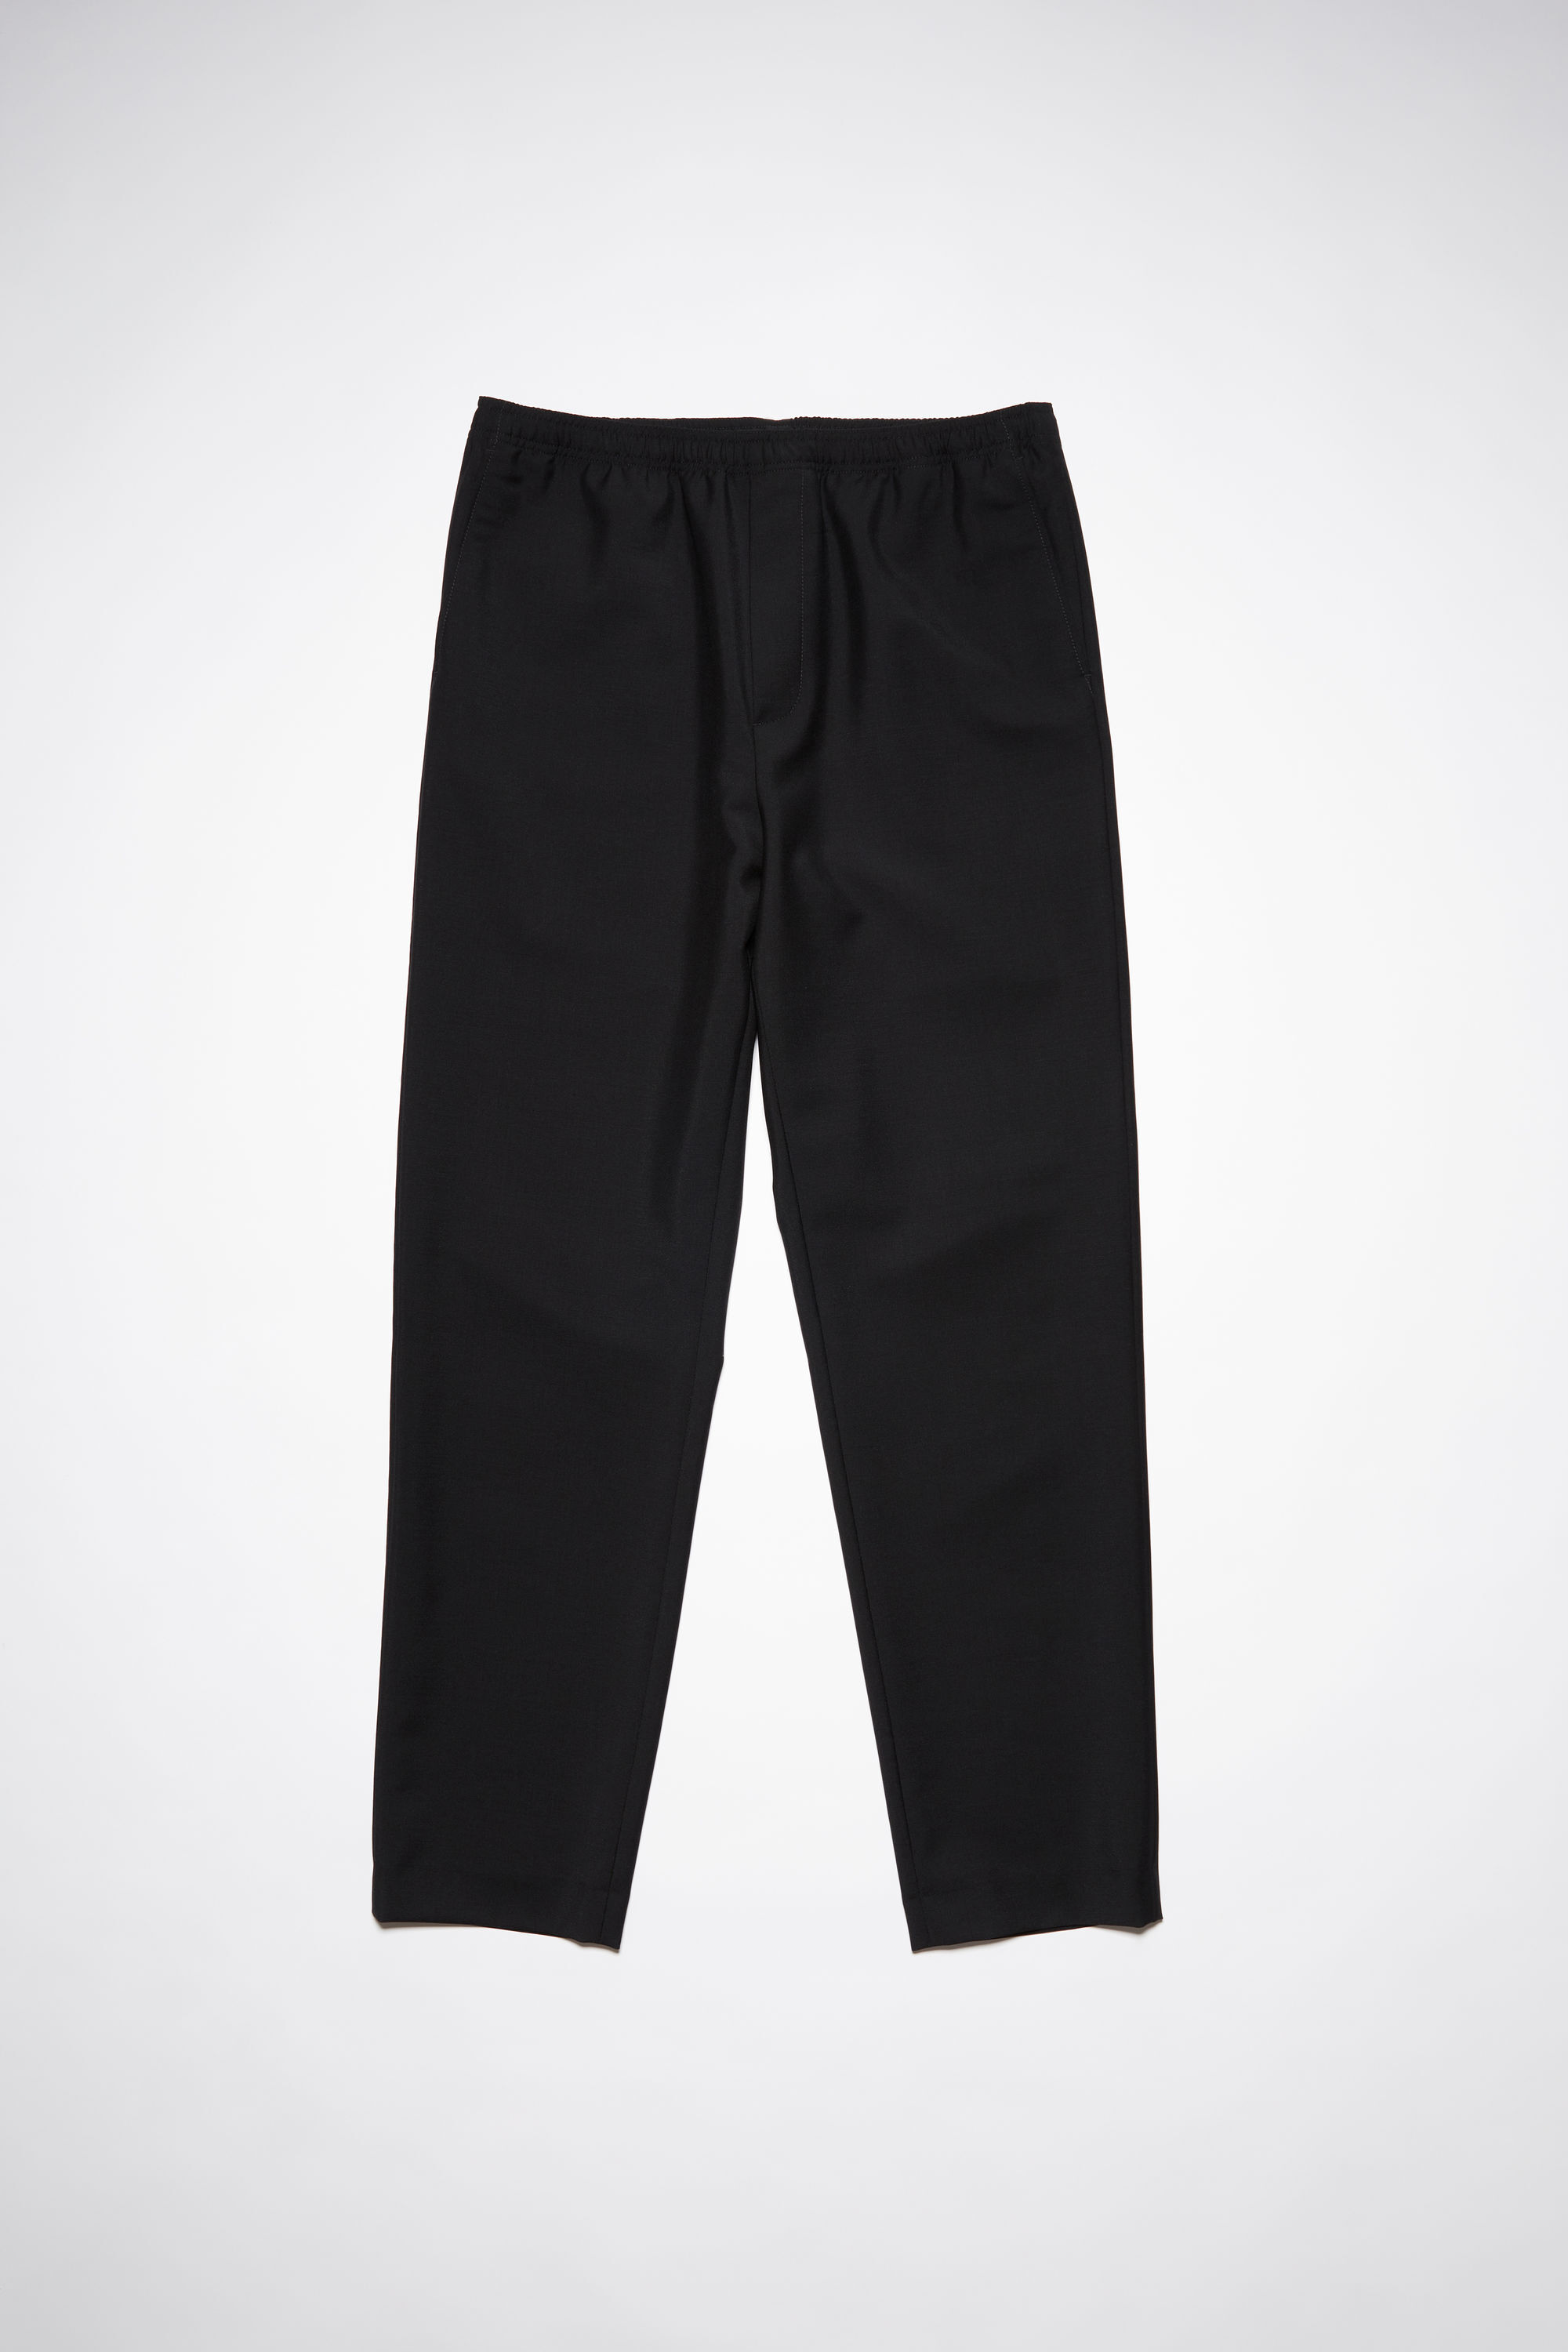 White Stuff Belle Wide Leg Cropped Trousers, Pure Black at John Lewis &  Partners